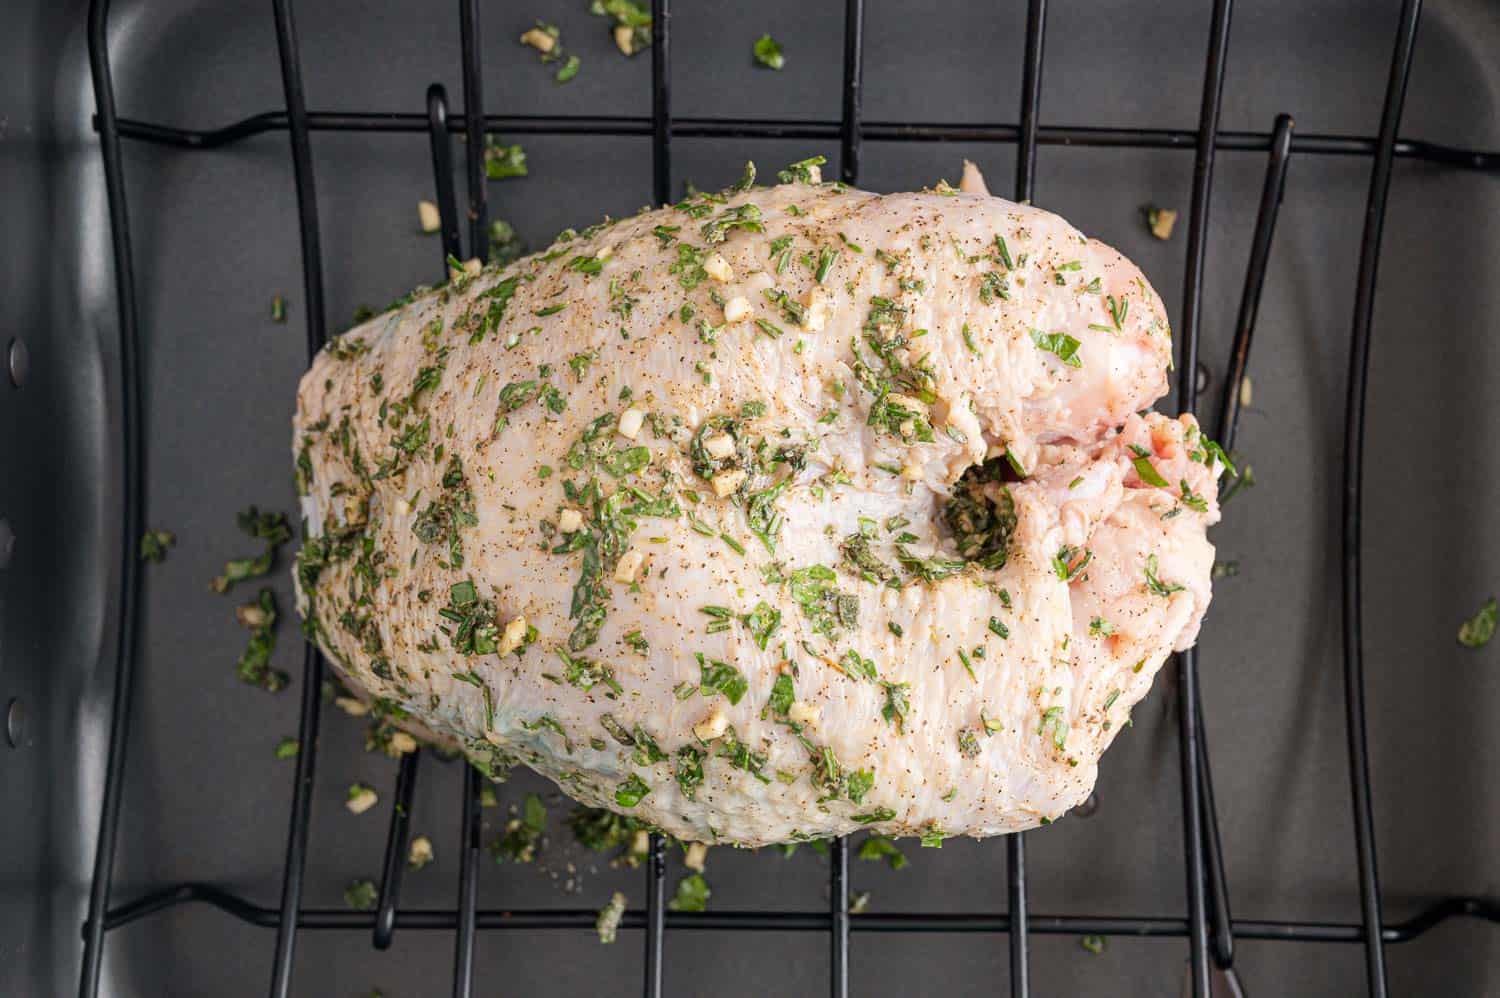 Turkey breast, not yet cooked, rubbed with herbs.